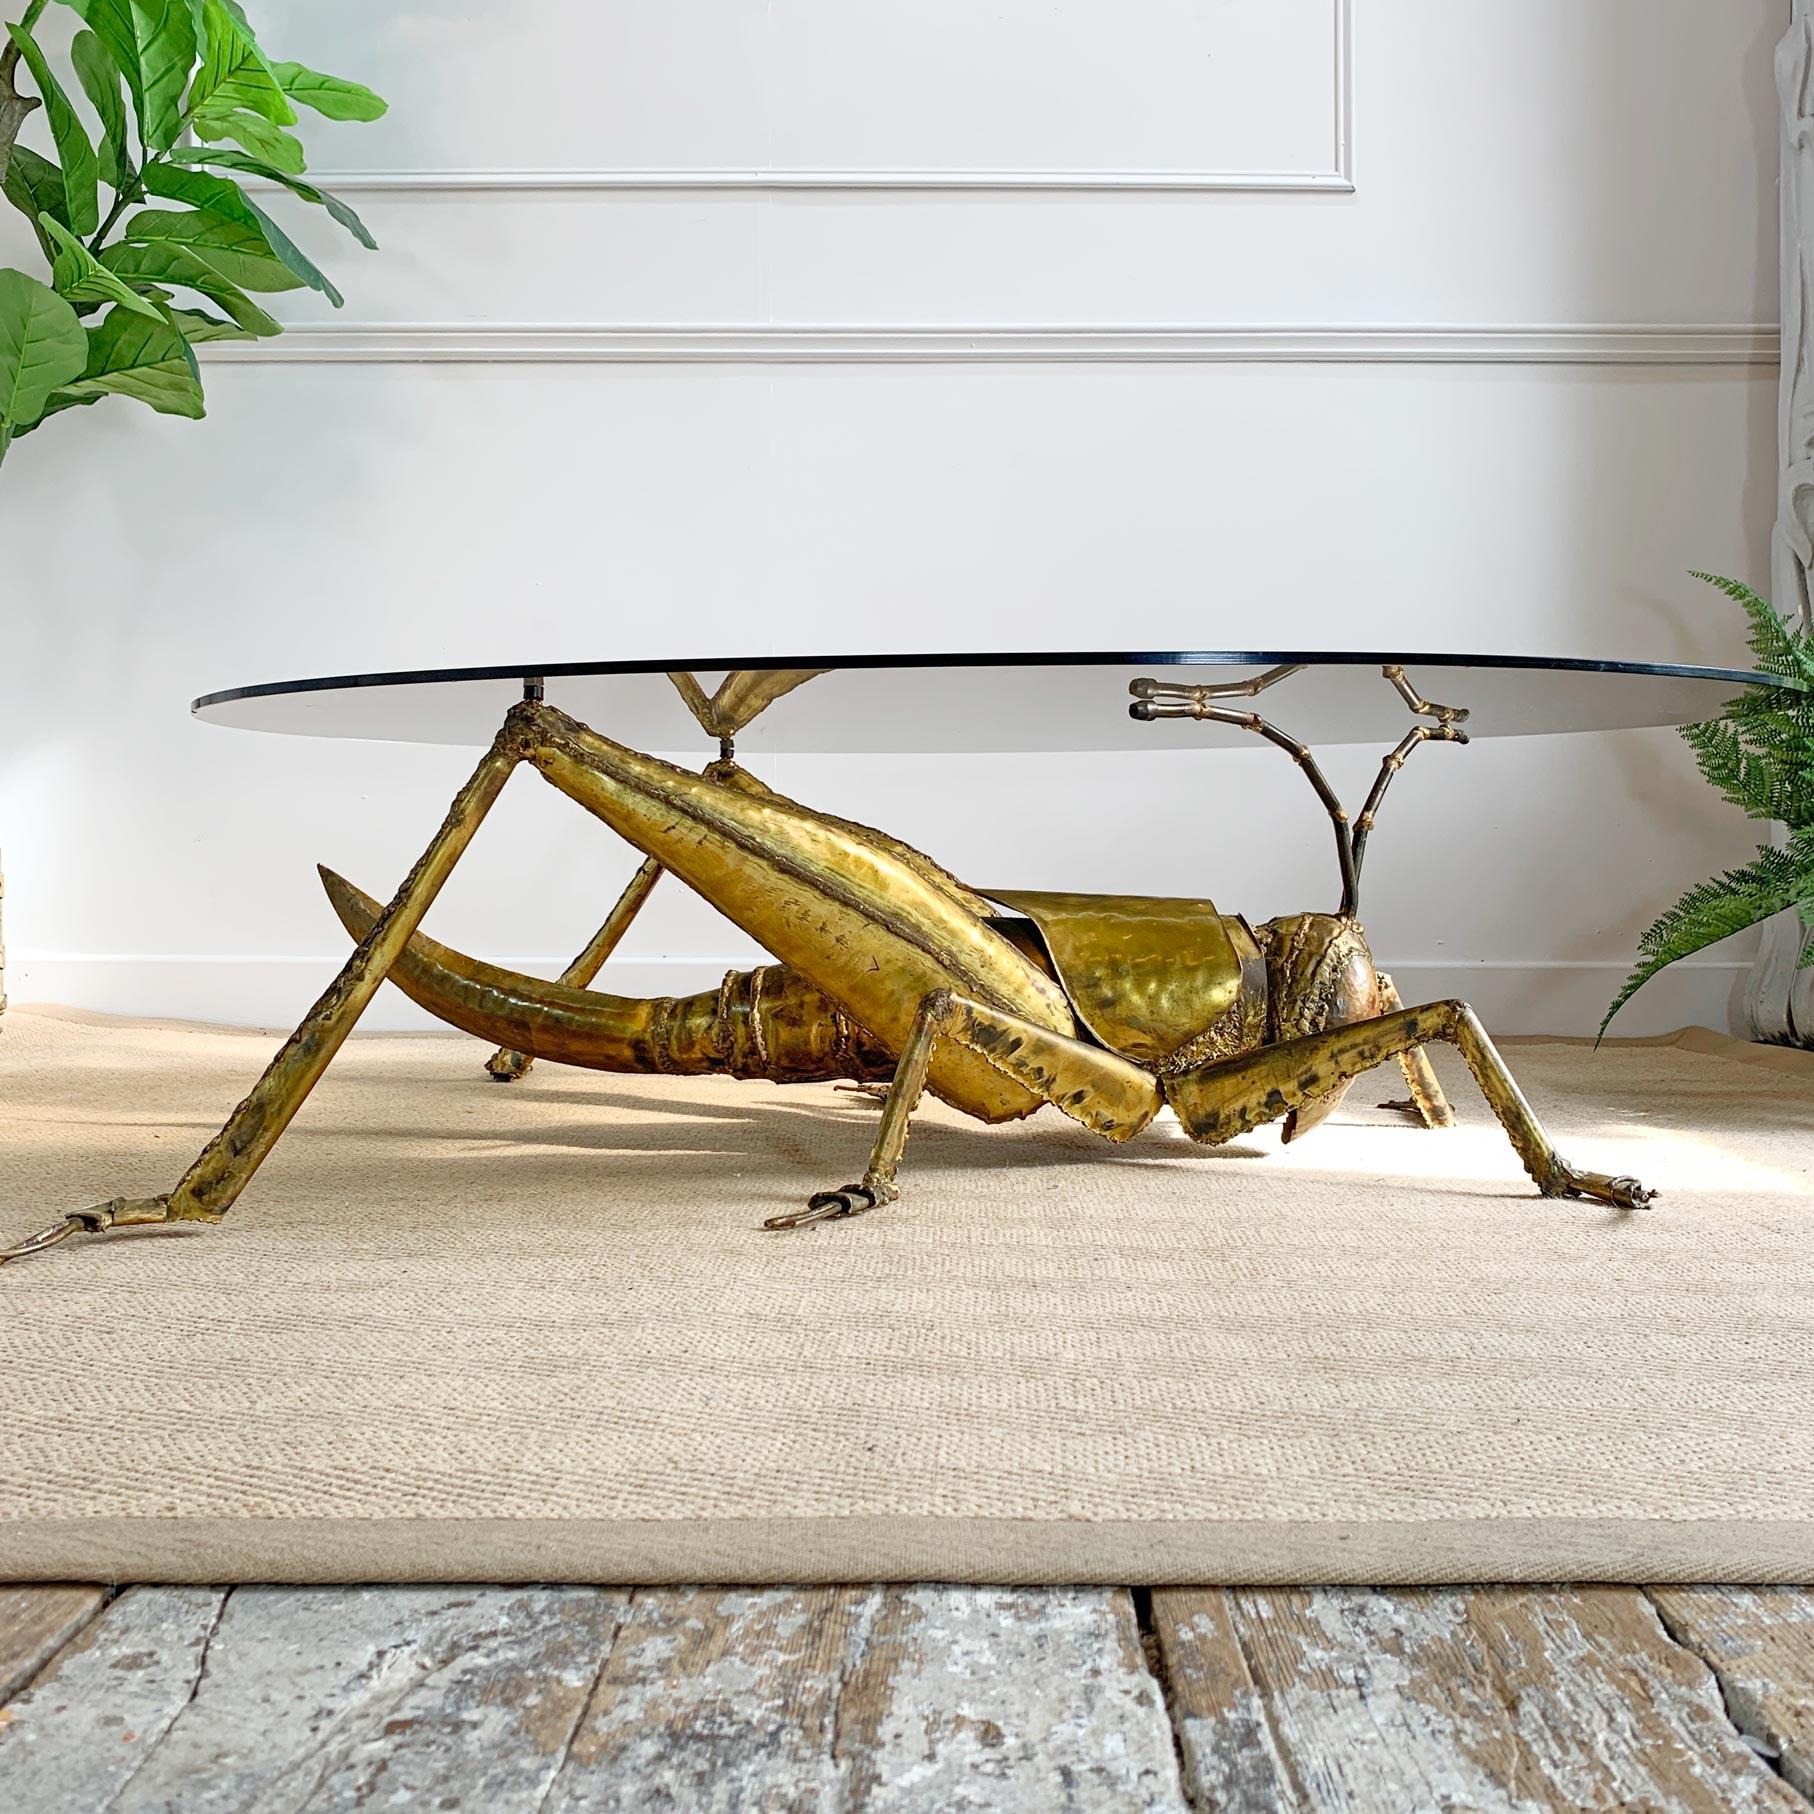 An exceptional brass and steel Grasshopper table created by the renowned French Sculptor and Artist, Francois Melin in the 1970s'. The table has been hand crafted by Melin using individual pieces of brass, shaped to form the various sections of the